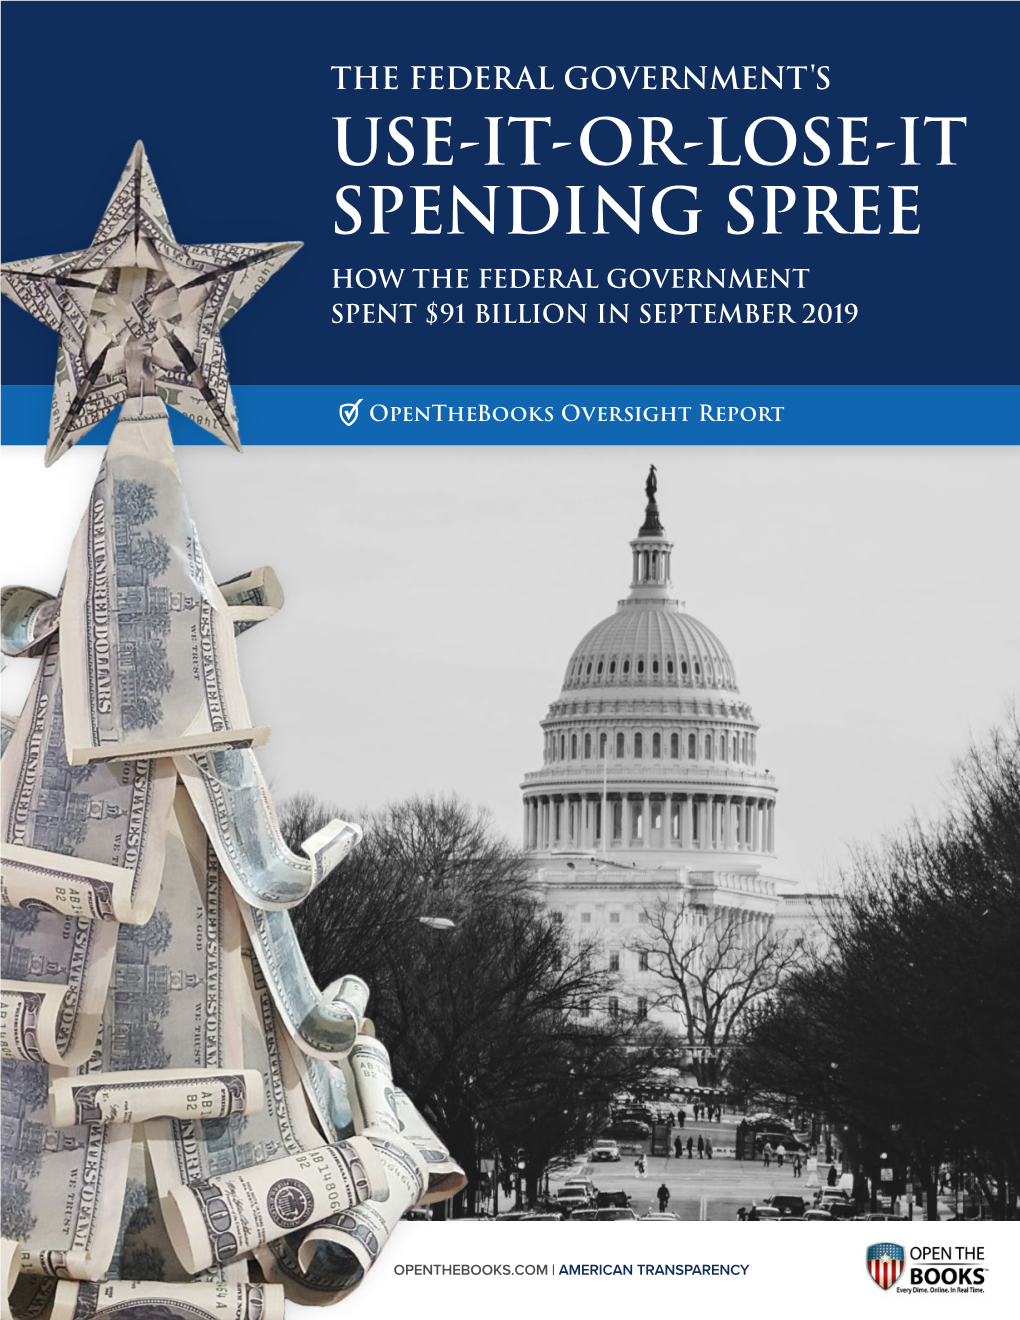 Use-It-Or-Lose-It Spending Spree How the Federal Government Spent $91 Billion in September 2019